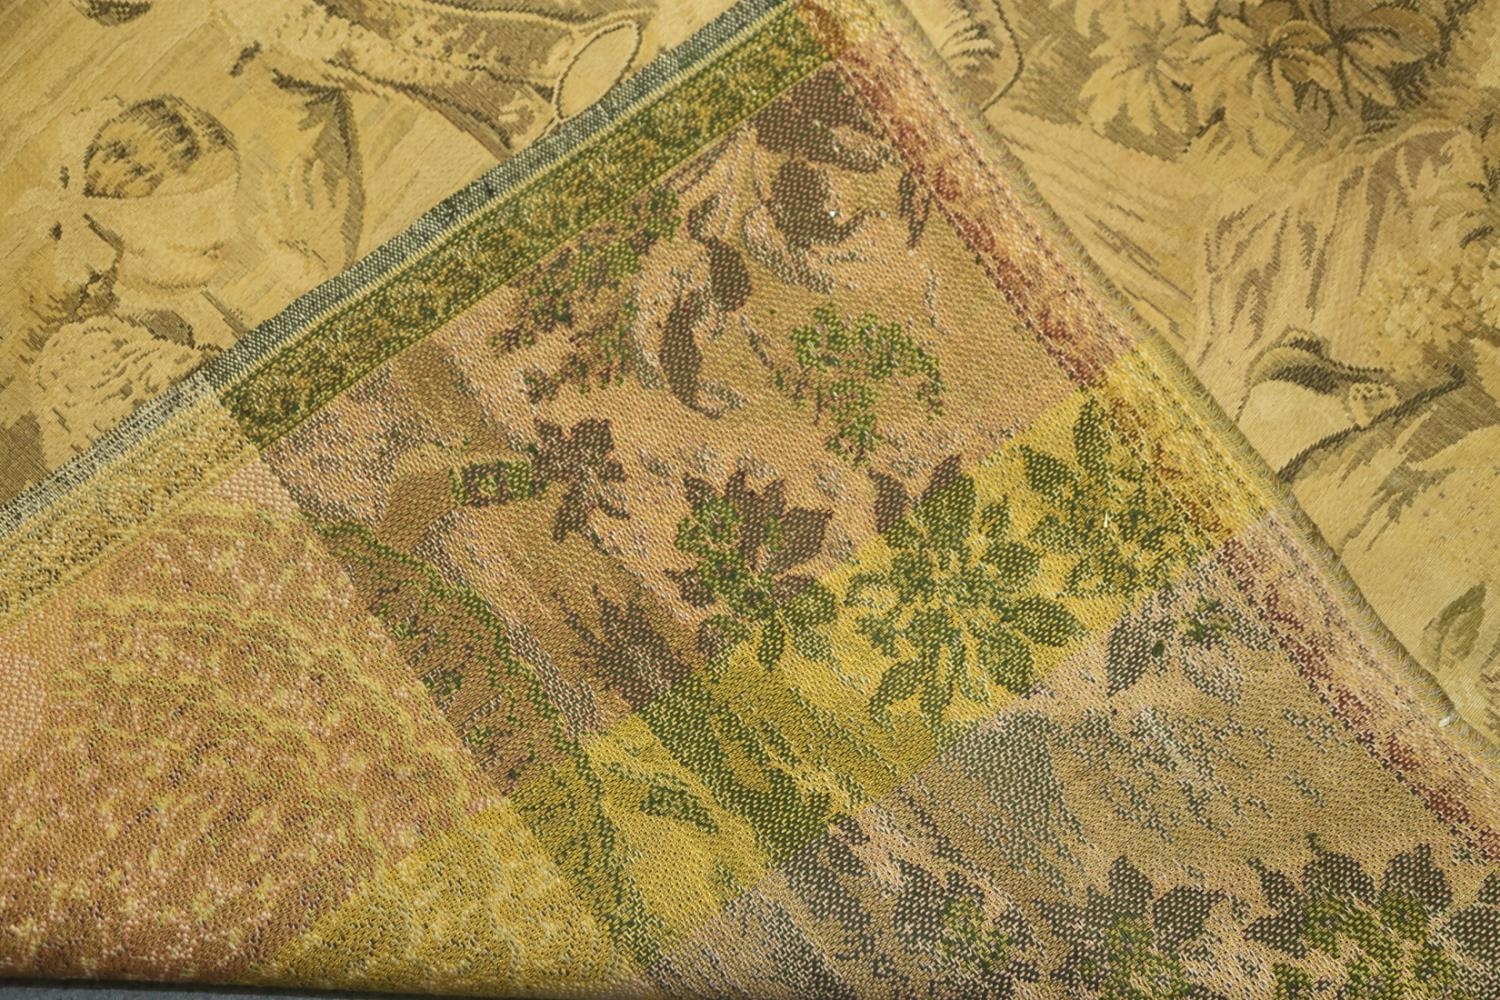 A Jacquard woven figured verdure tapestry panel, 66" high x 70" wide - Image 3 of 3